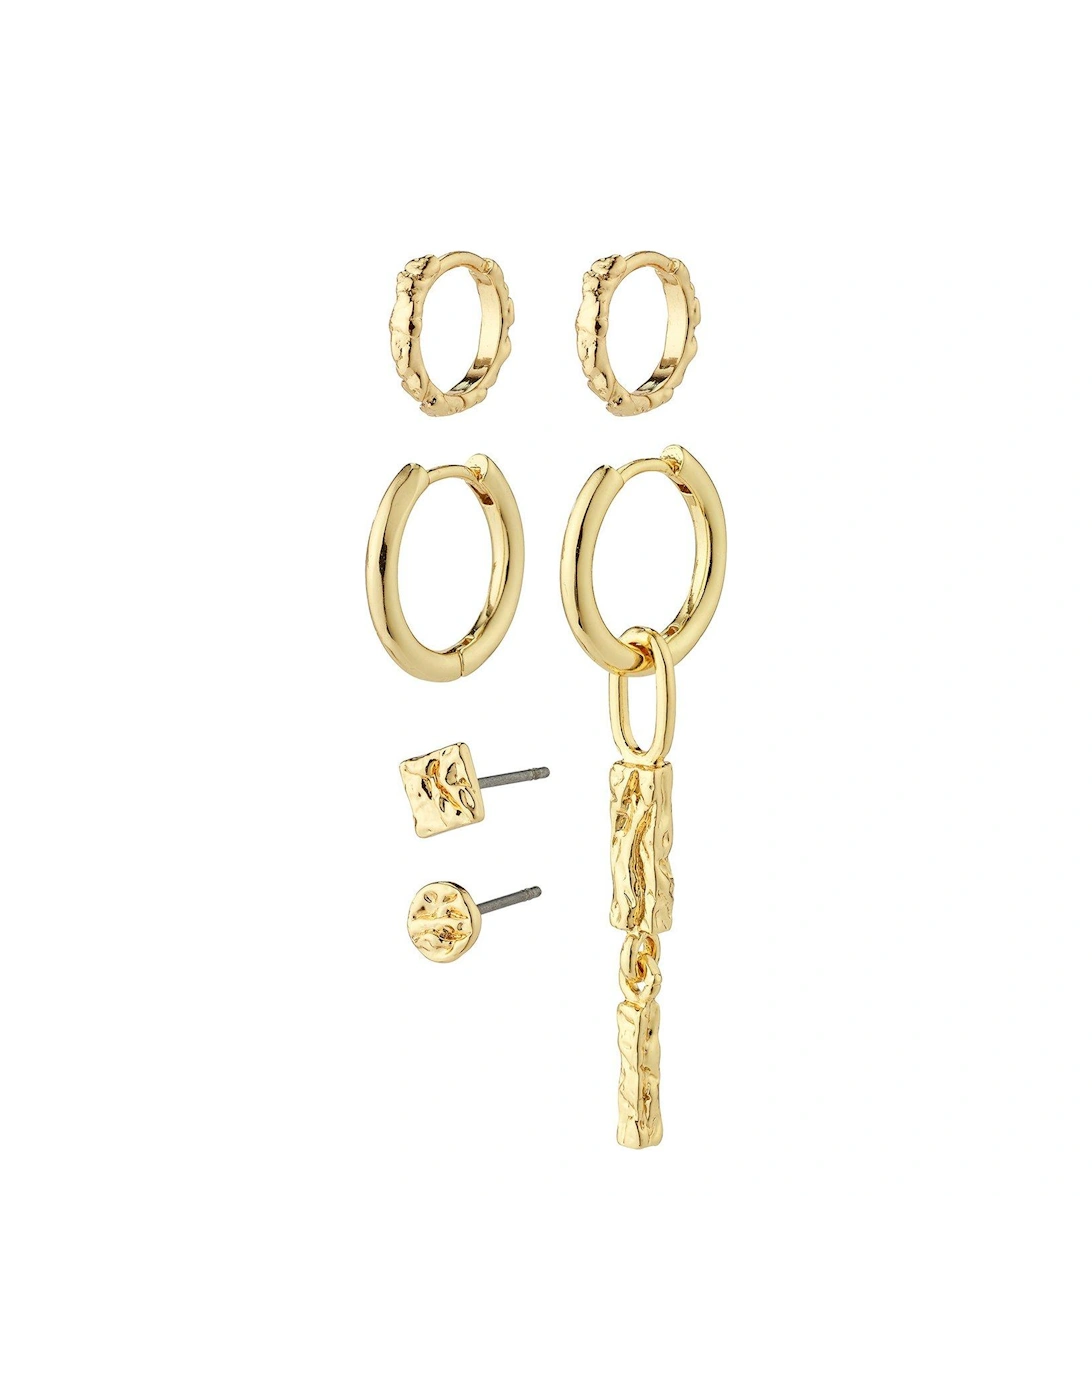 STAR Earrings, 3-in-1 Set - Gold Plated, 2 of 1